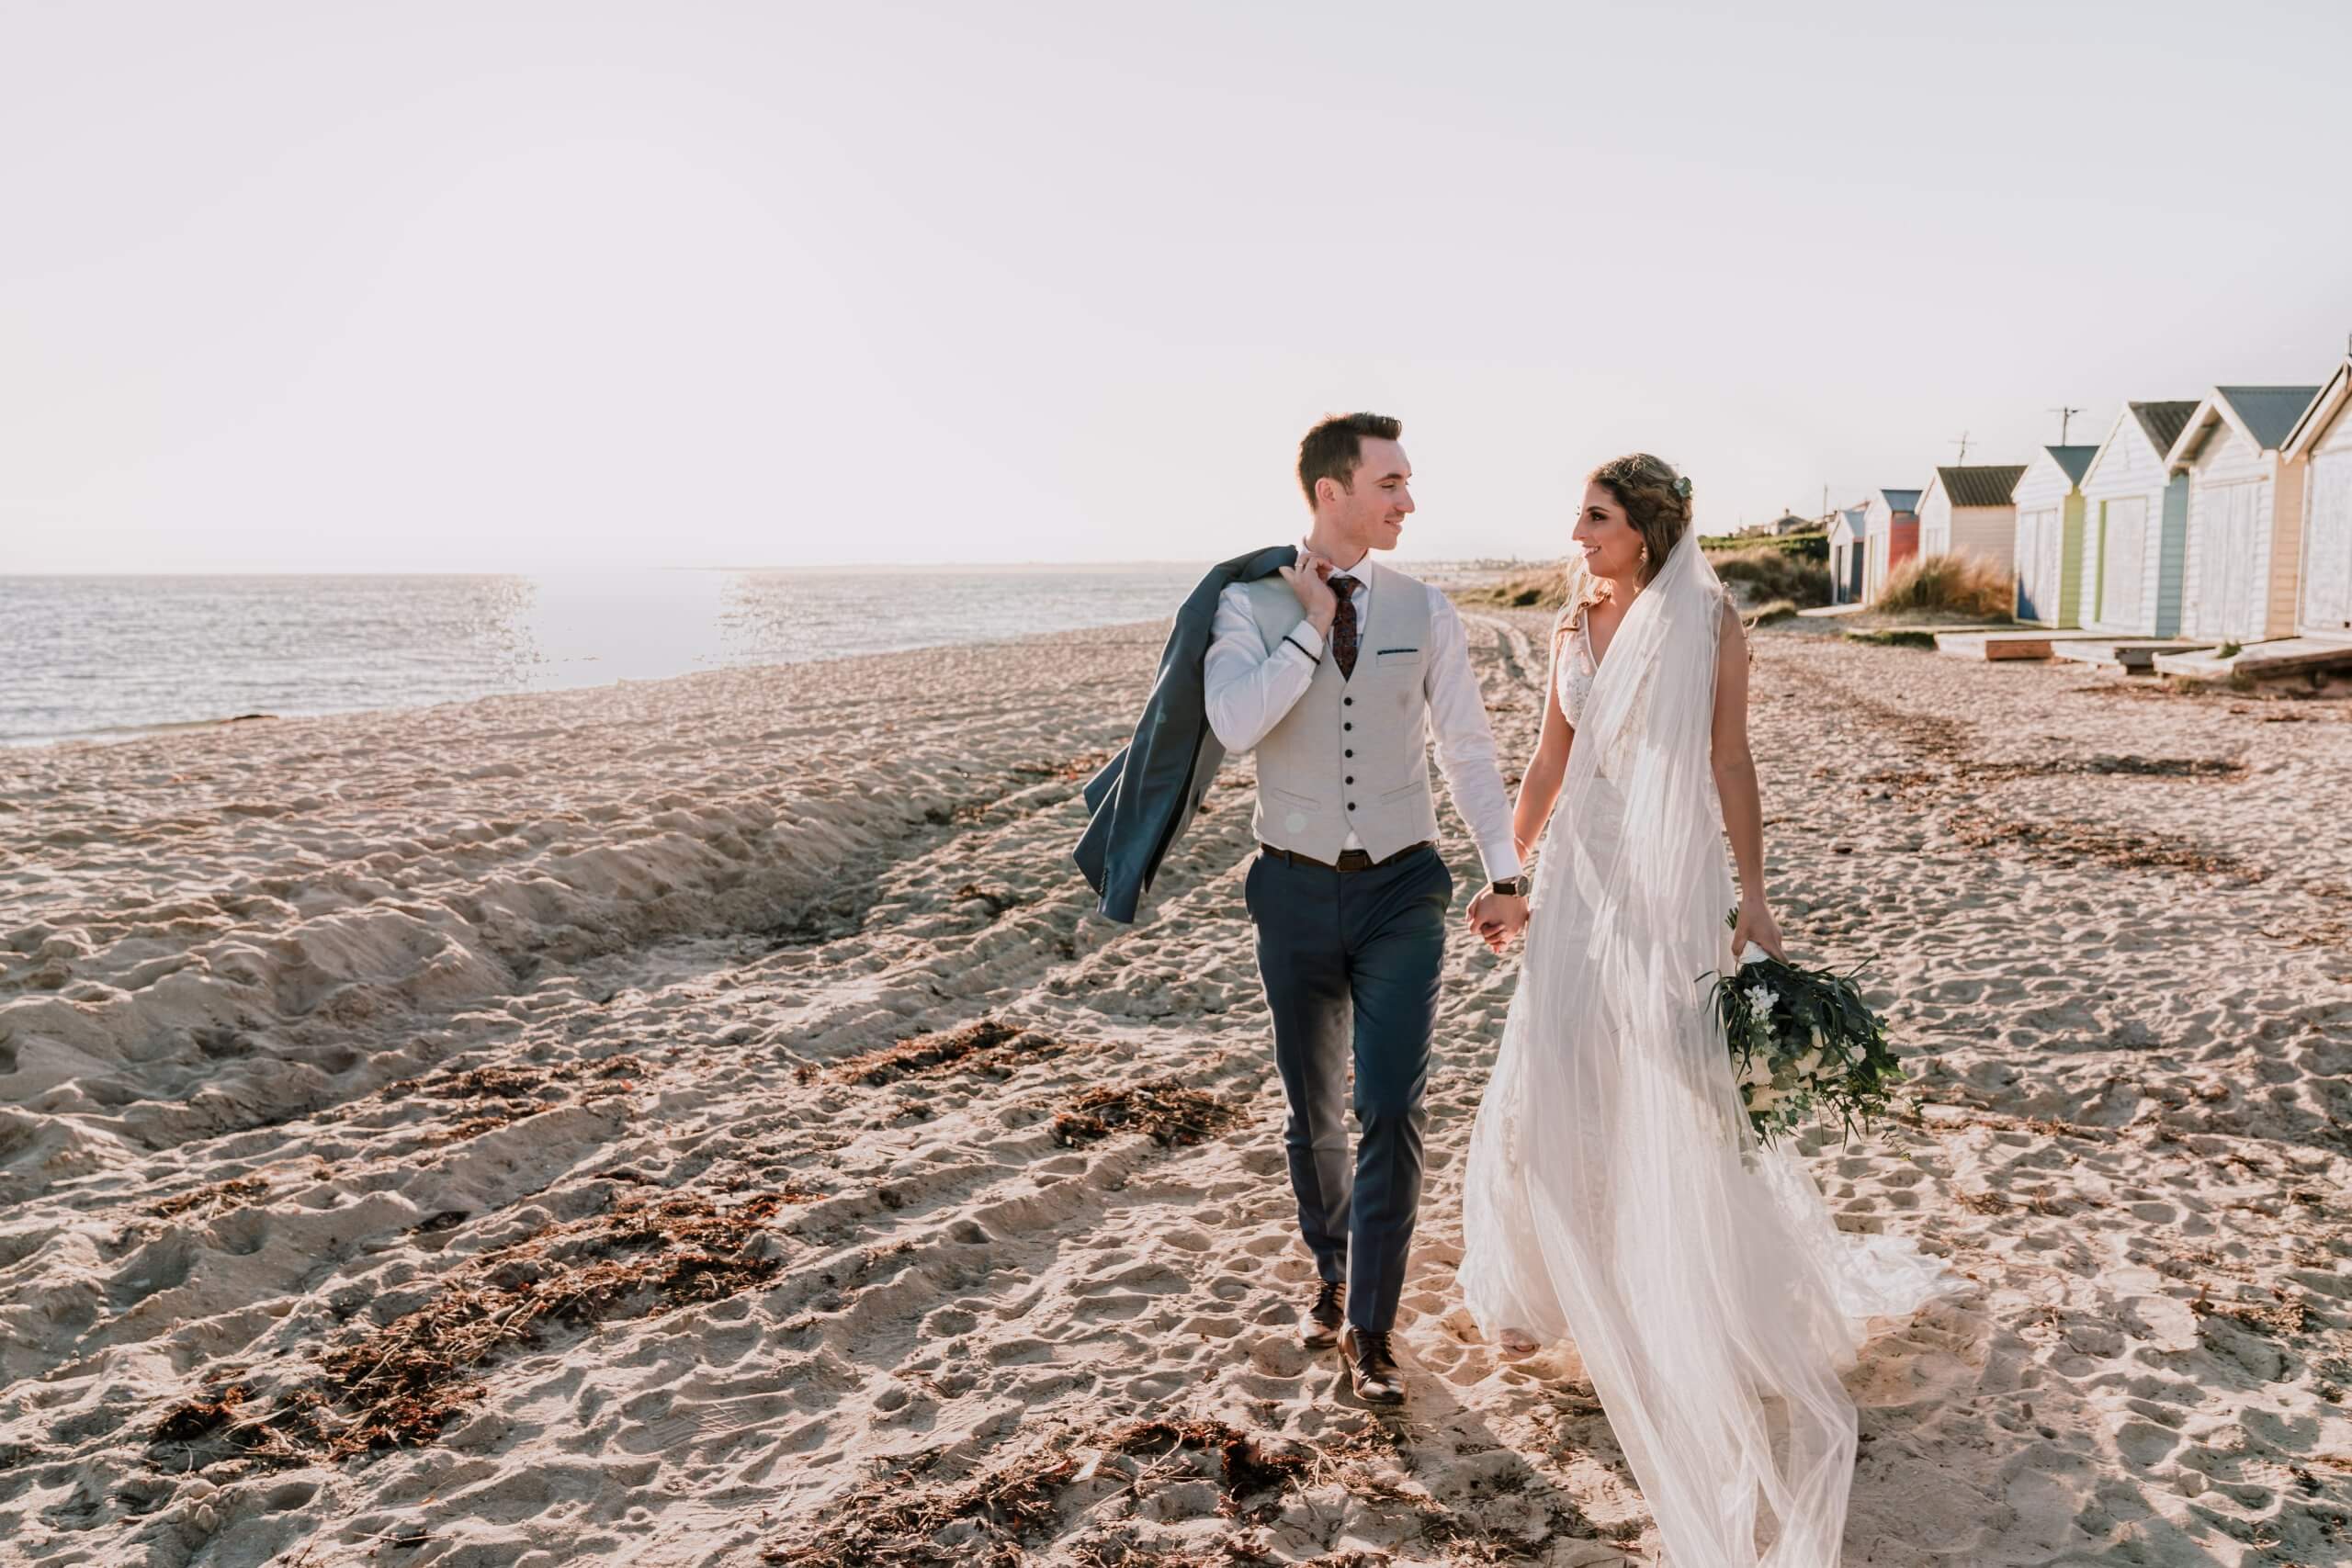 Bride and groom walking the shoreline, with the setting sun casting them in a golden glow.